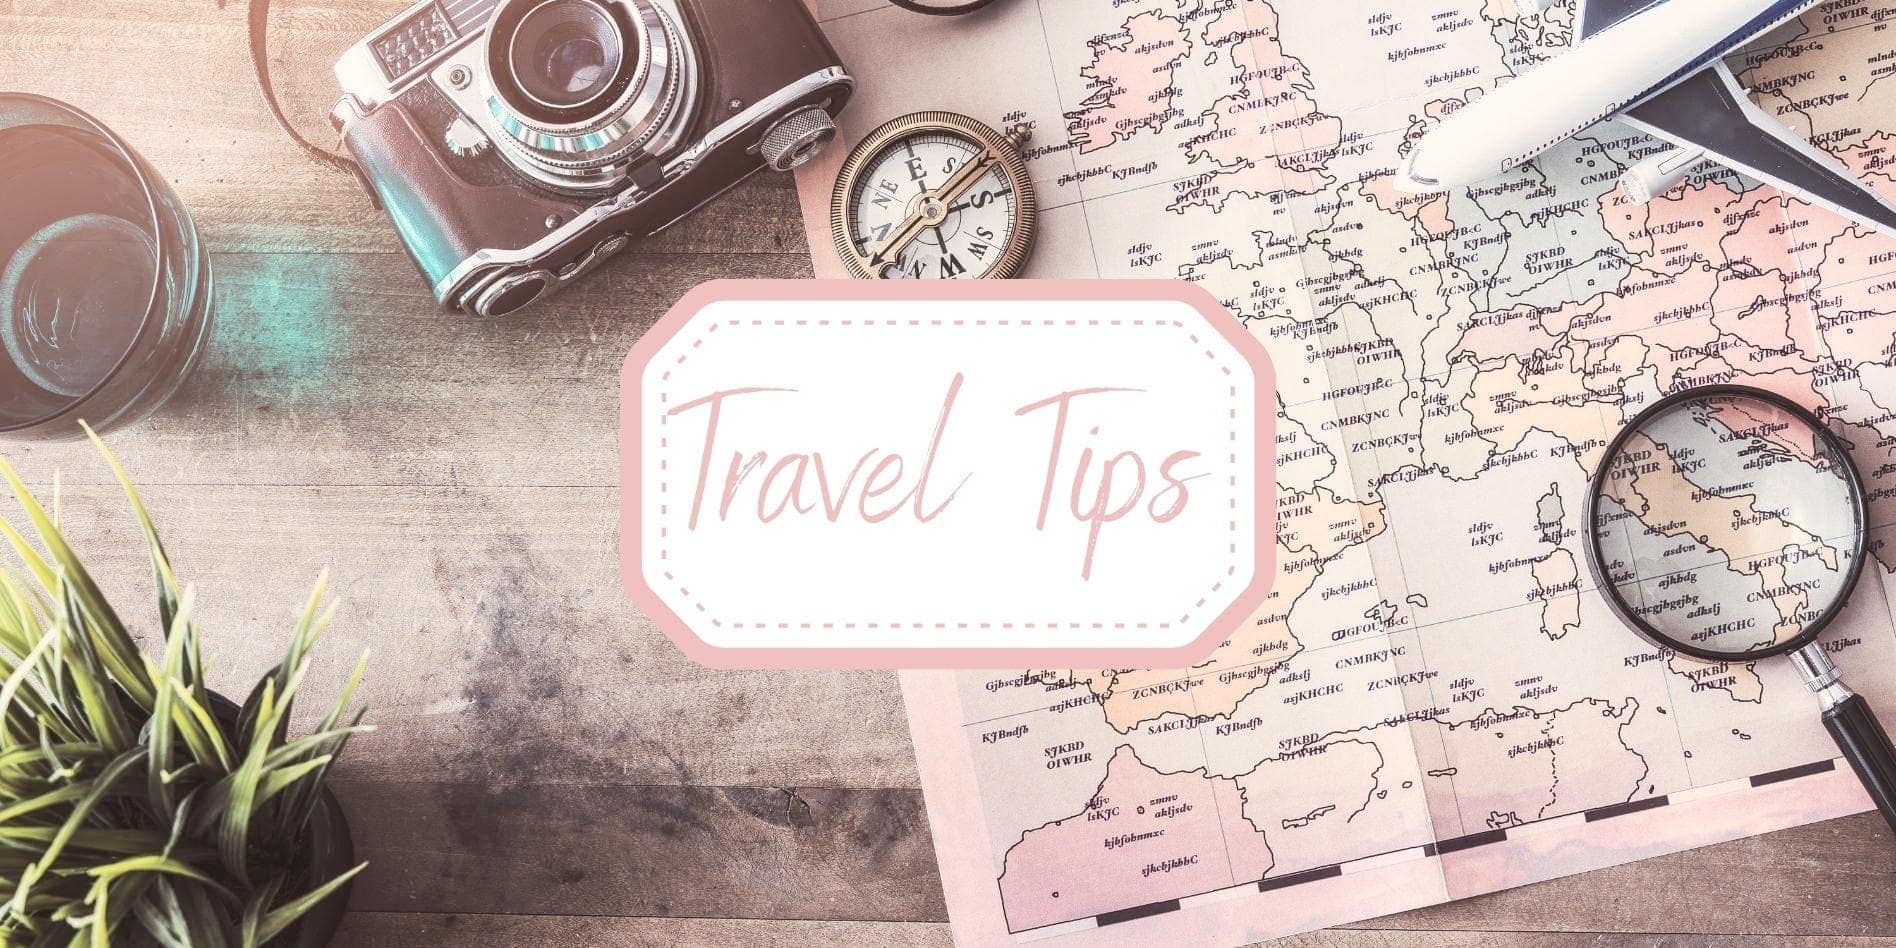 Travel-tips-header photo of map, camera, magnifying glass